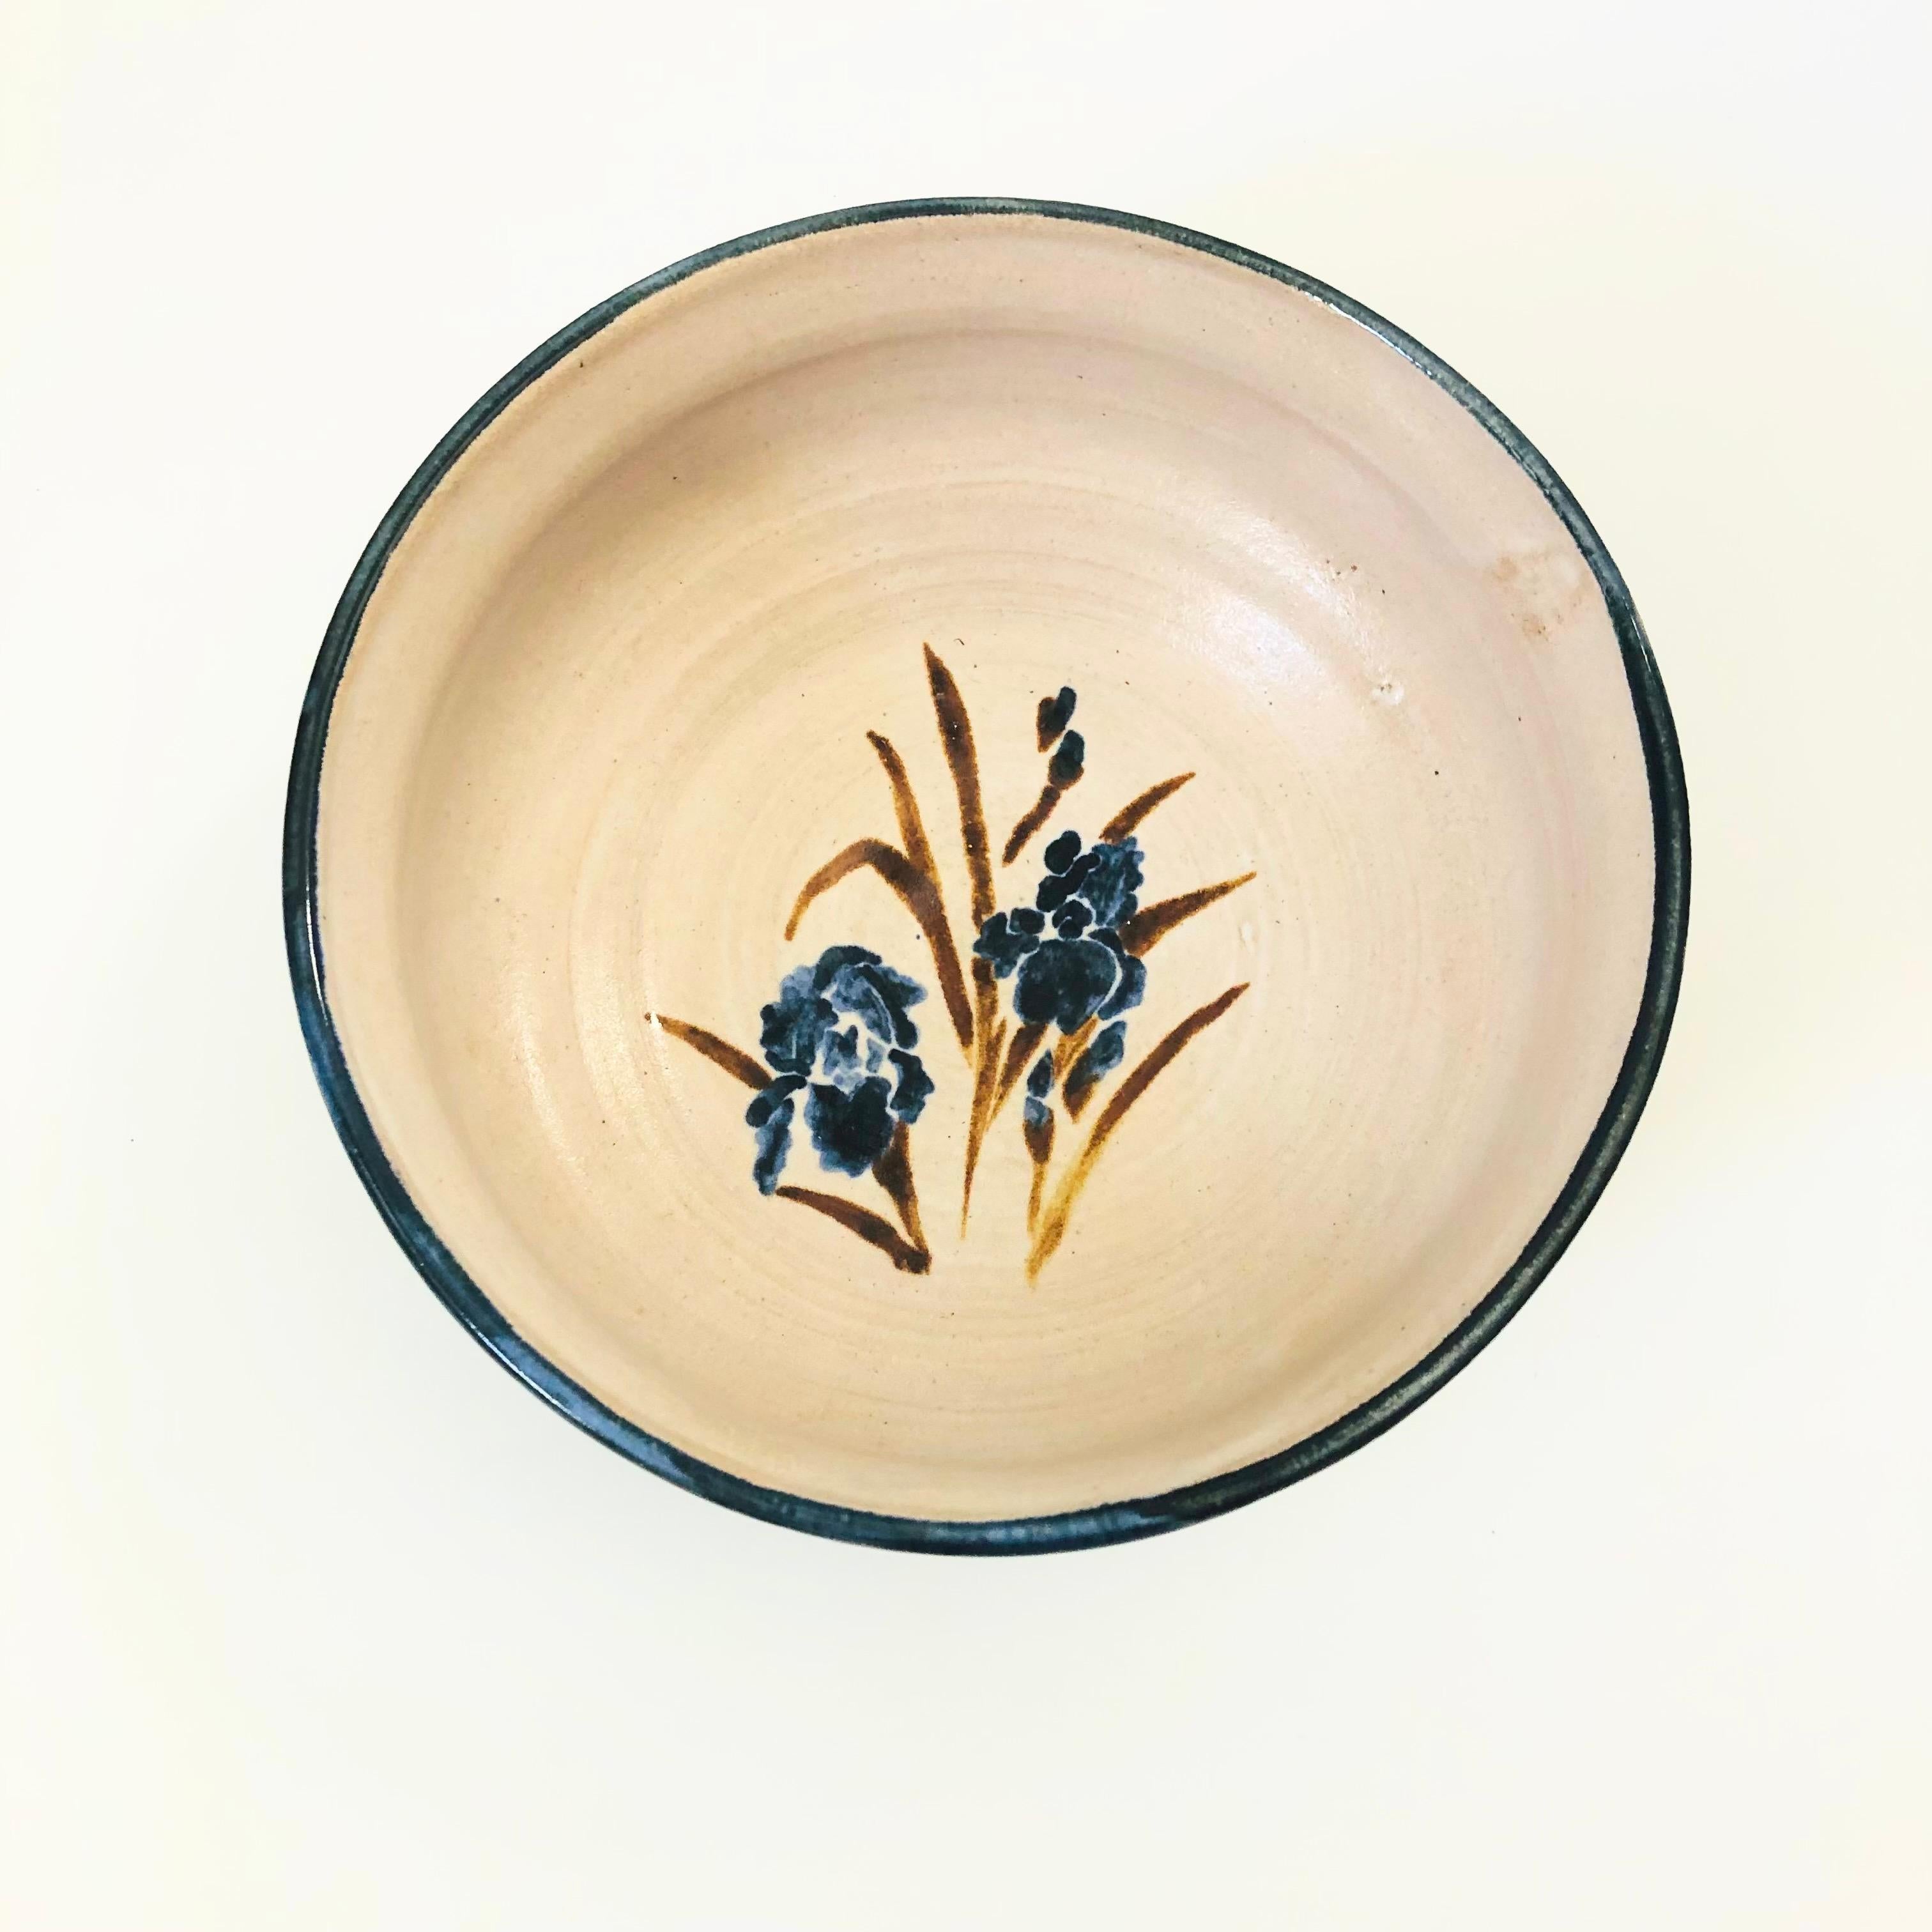 A beautiful vintage studio pottery bowl. Pale purple-gray glaze with a lovely hand painted iris design in the center in blue and brown glazes. Dark blue glaze at the rim. Nice size, perfect for serving a variety of dishes or using as a fruit bowl.